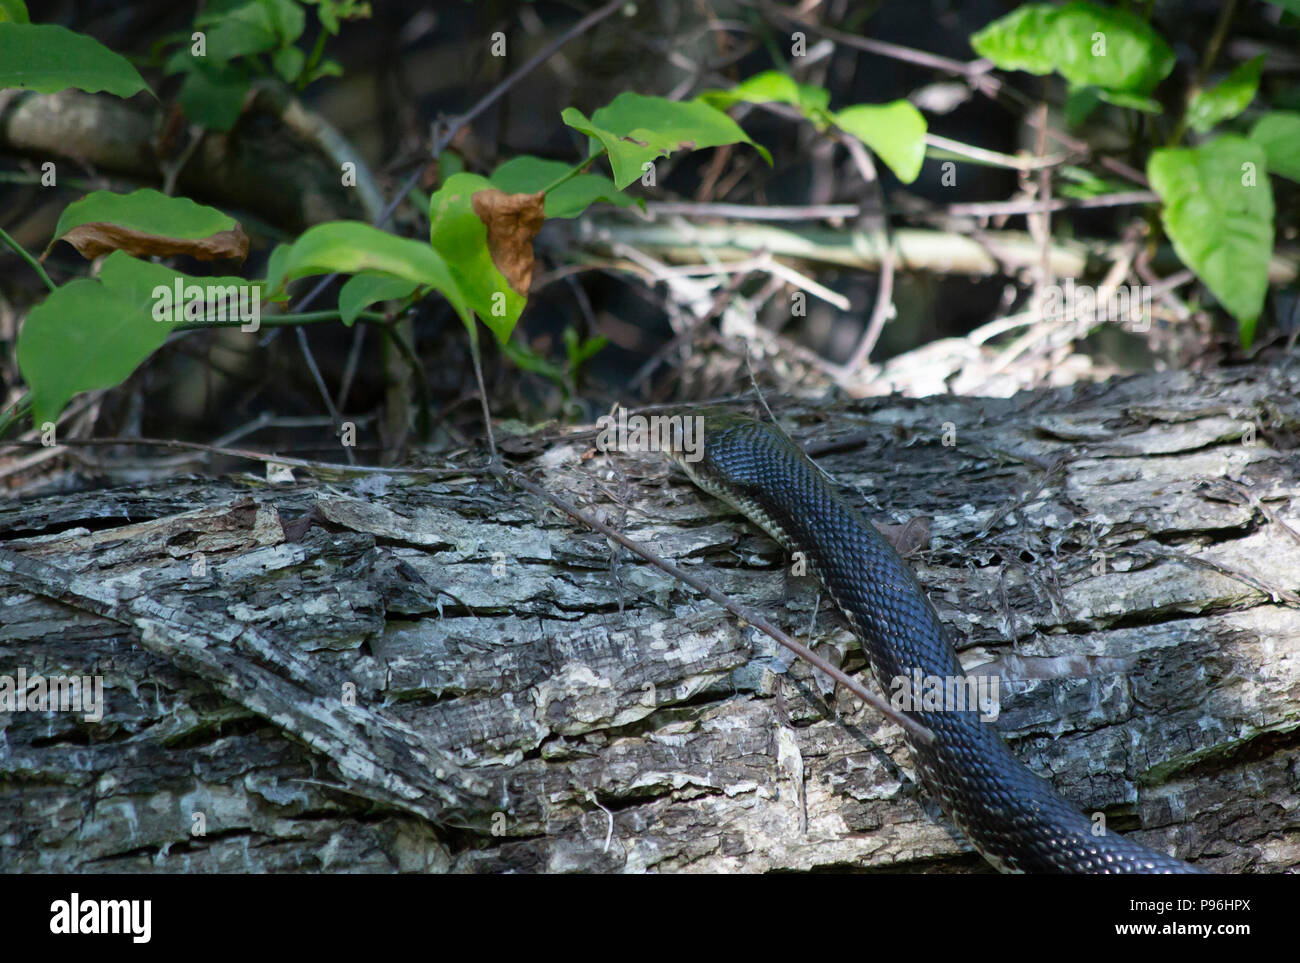 Western rat snake (Pantherophis obsoletus), also known as a chicken snake, crawling over a large fallen tree trunk Stock Photo